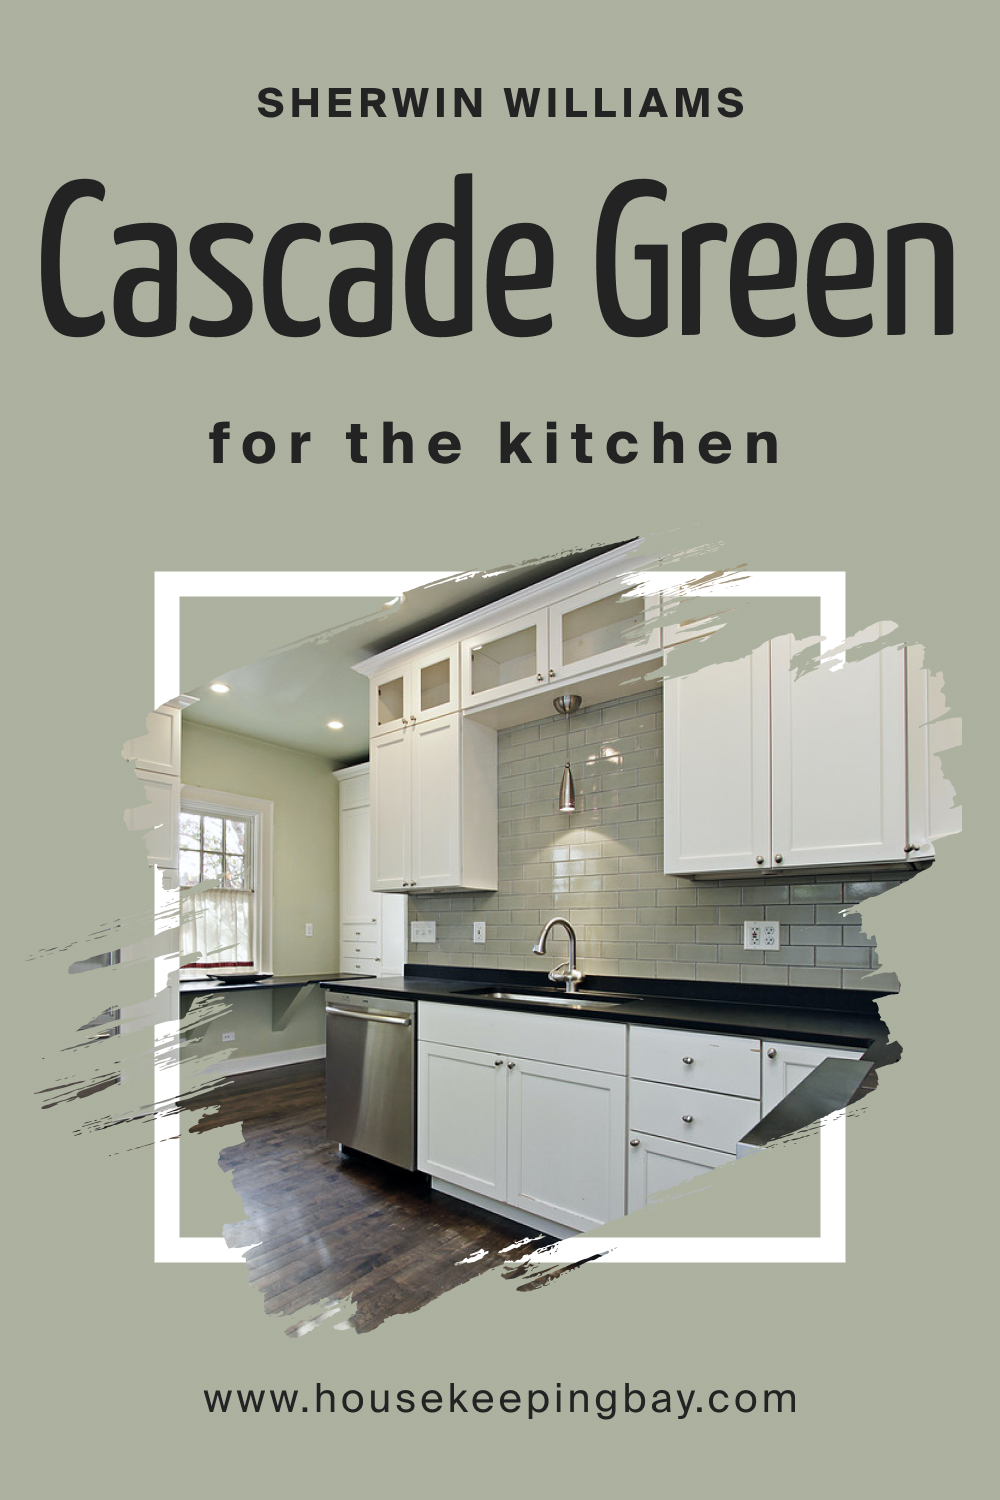 Sherwin Williams. SW 0066 Cascade Green For the Kitchens